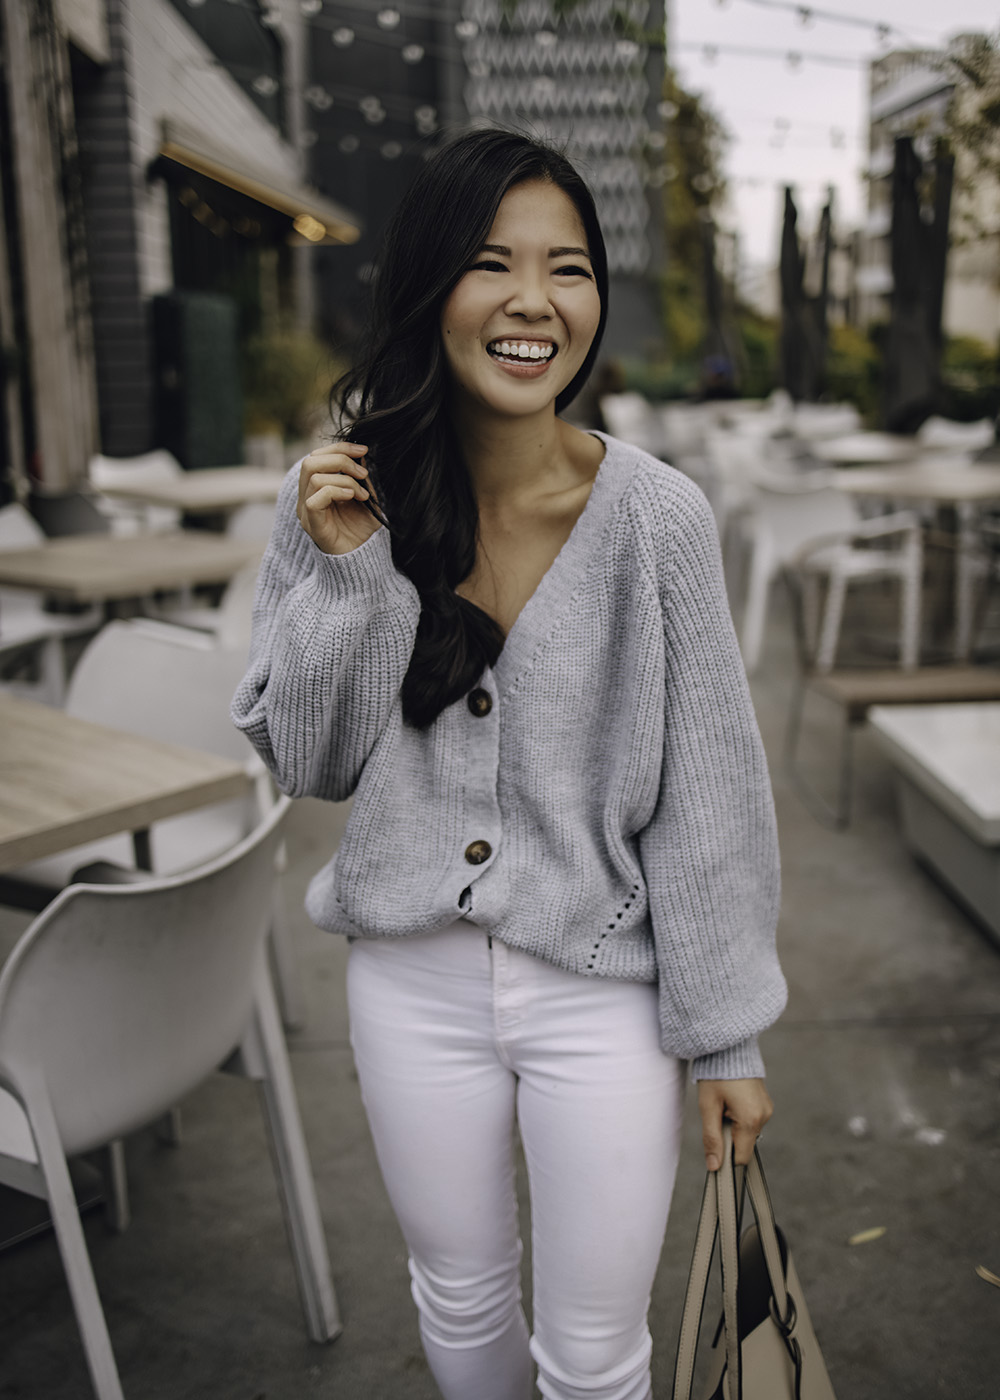 Loving white jeans winter looks lately, but not sure how to style